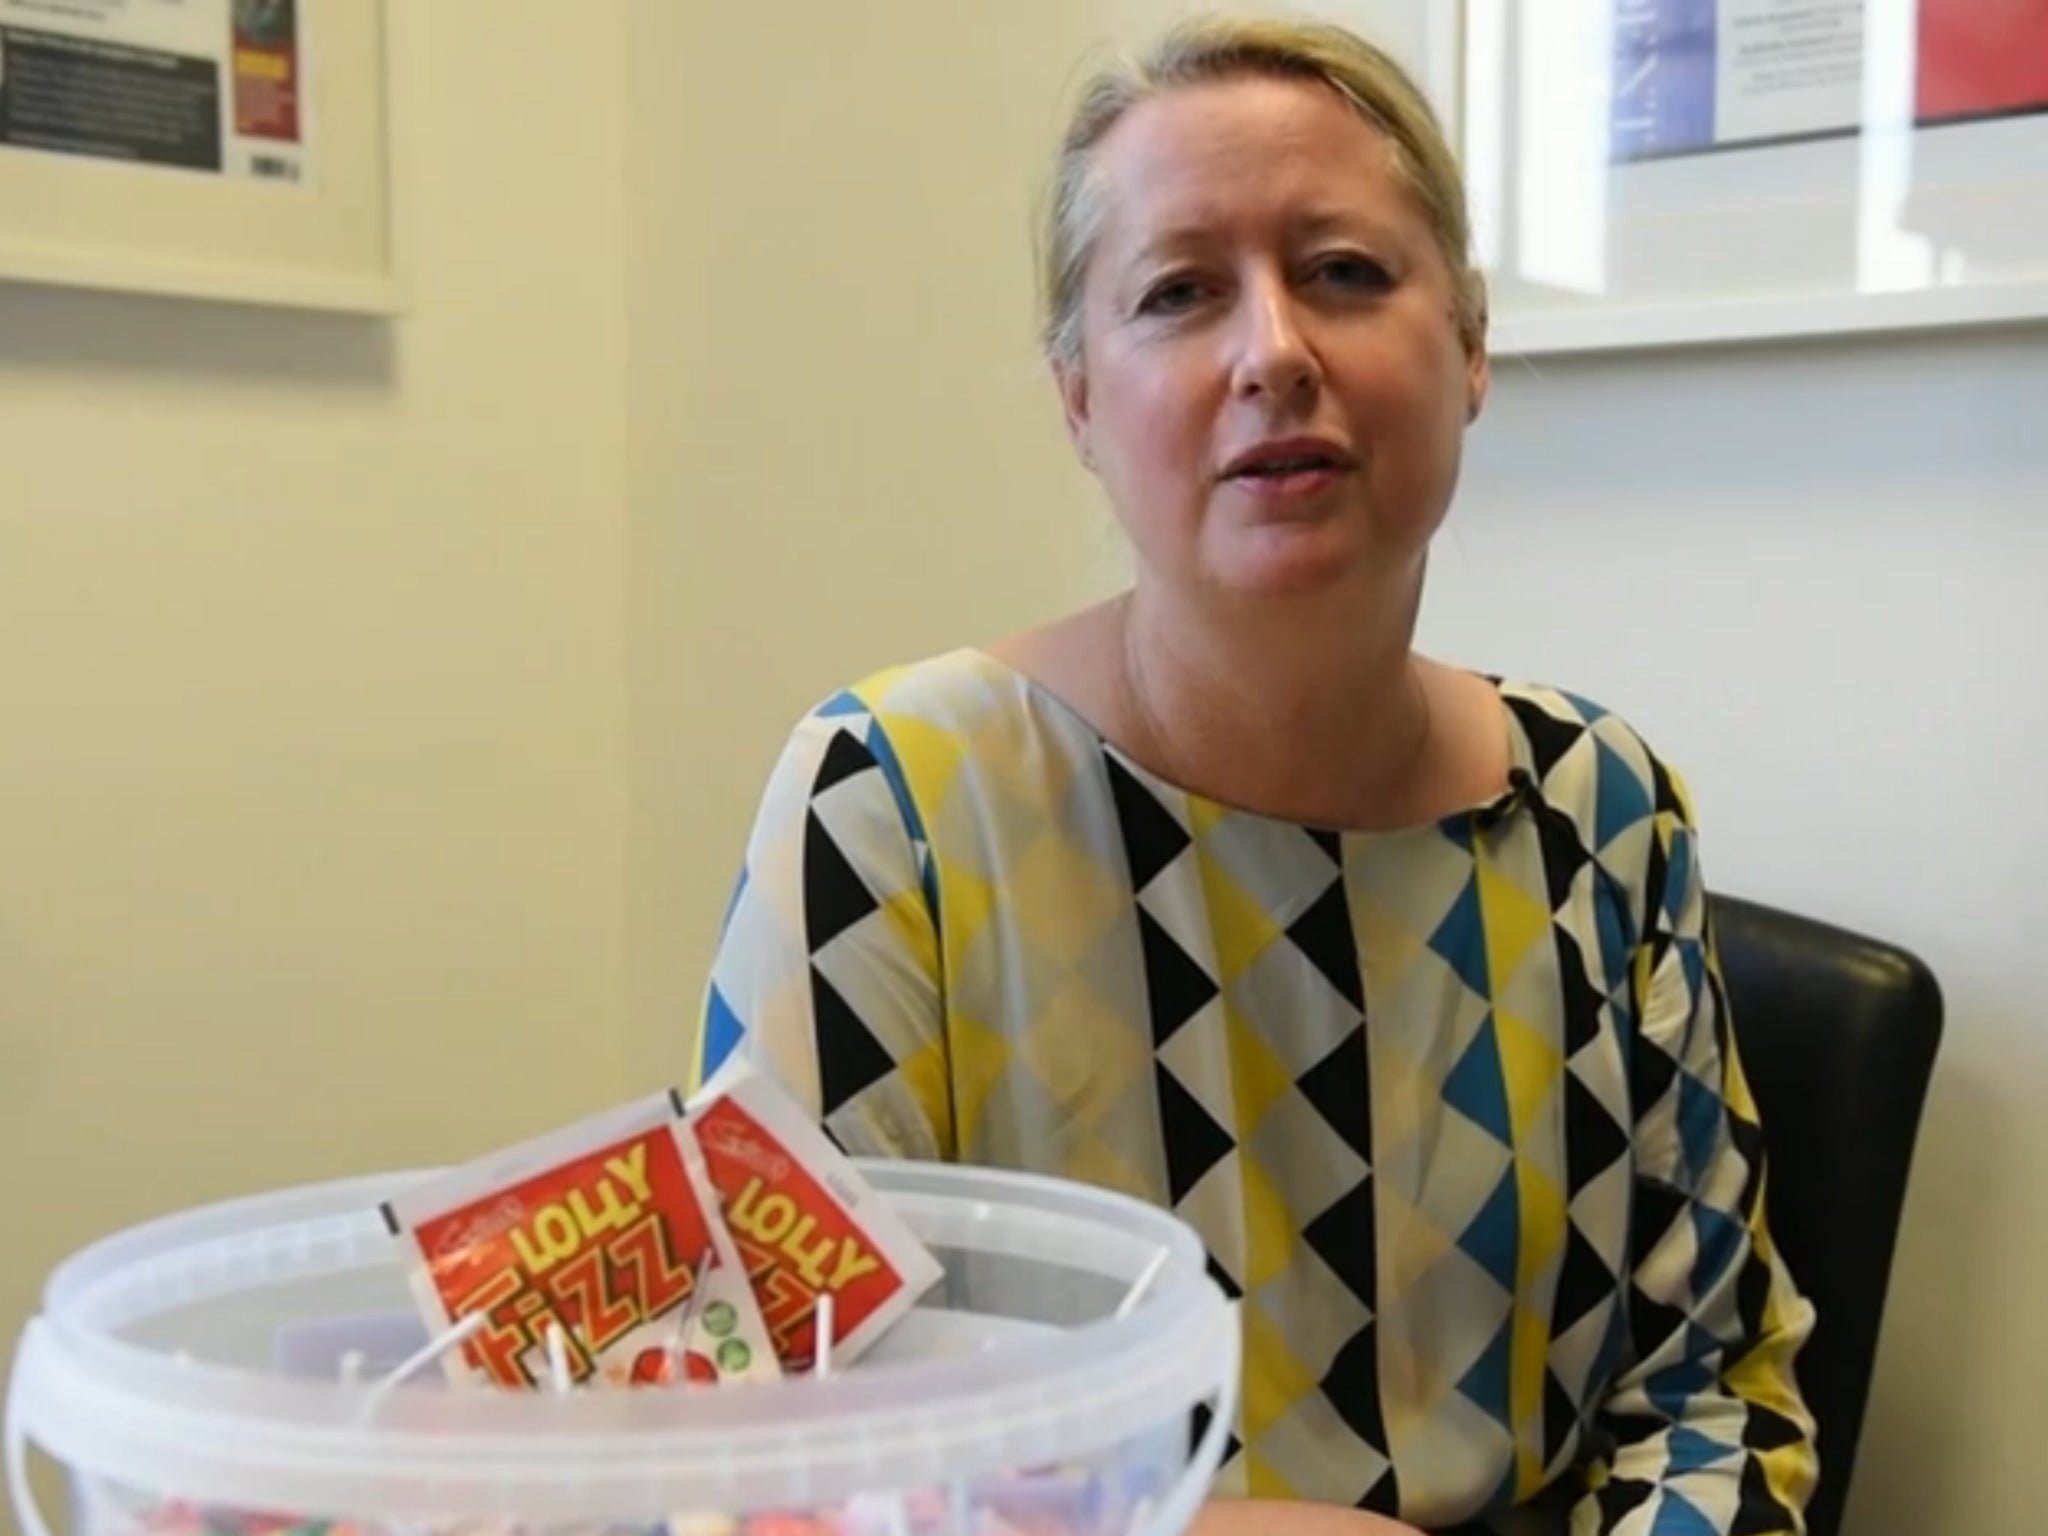 Lisa Markwell, editor of The Independent on Sunday, has pledged to give up sugar for January